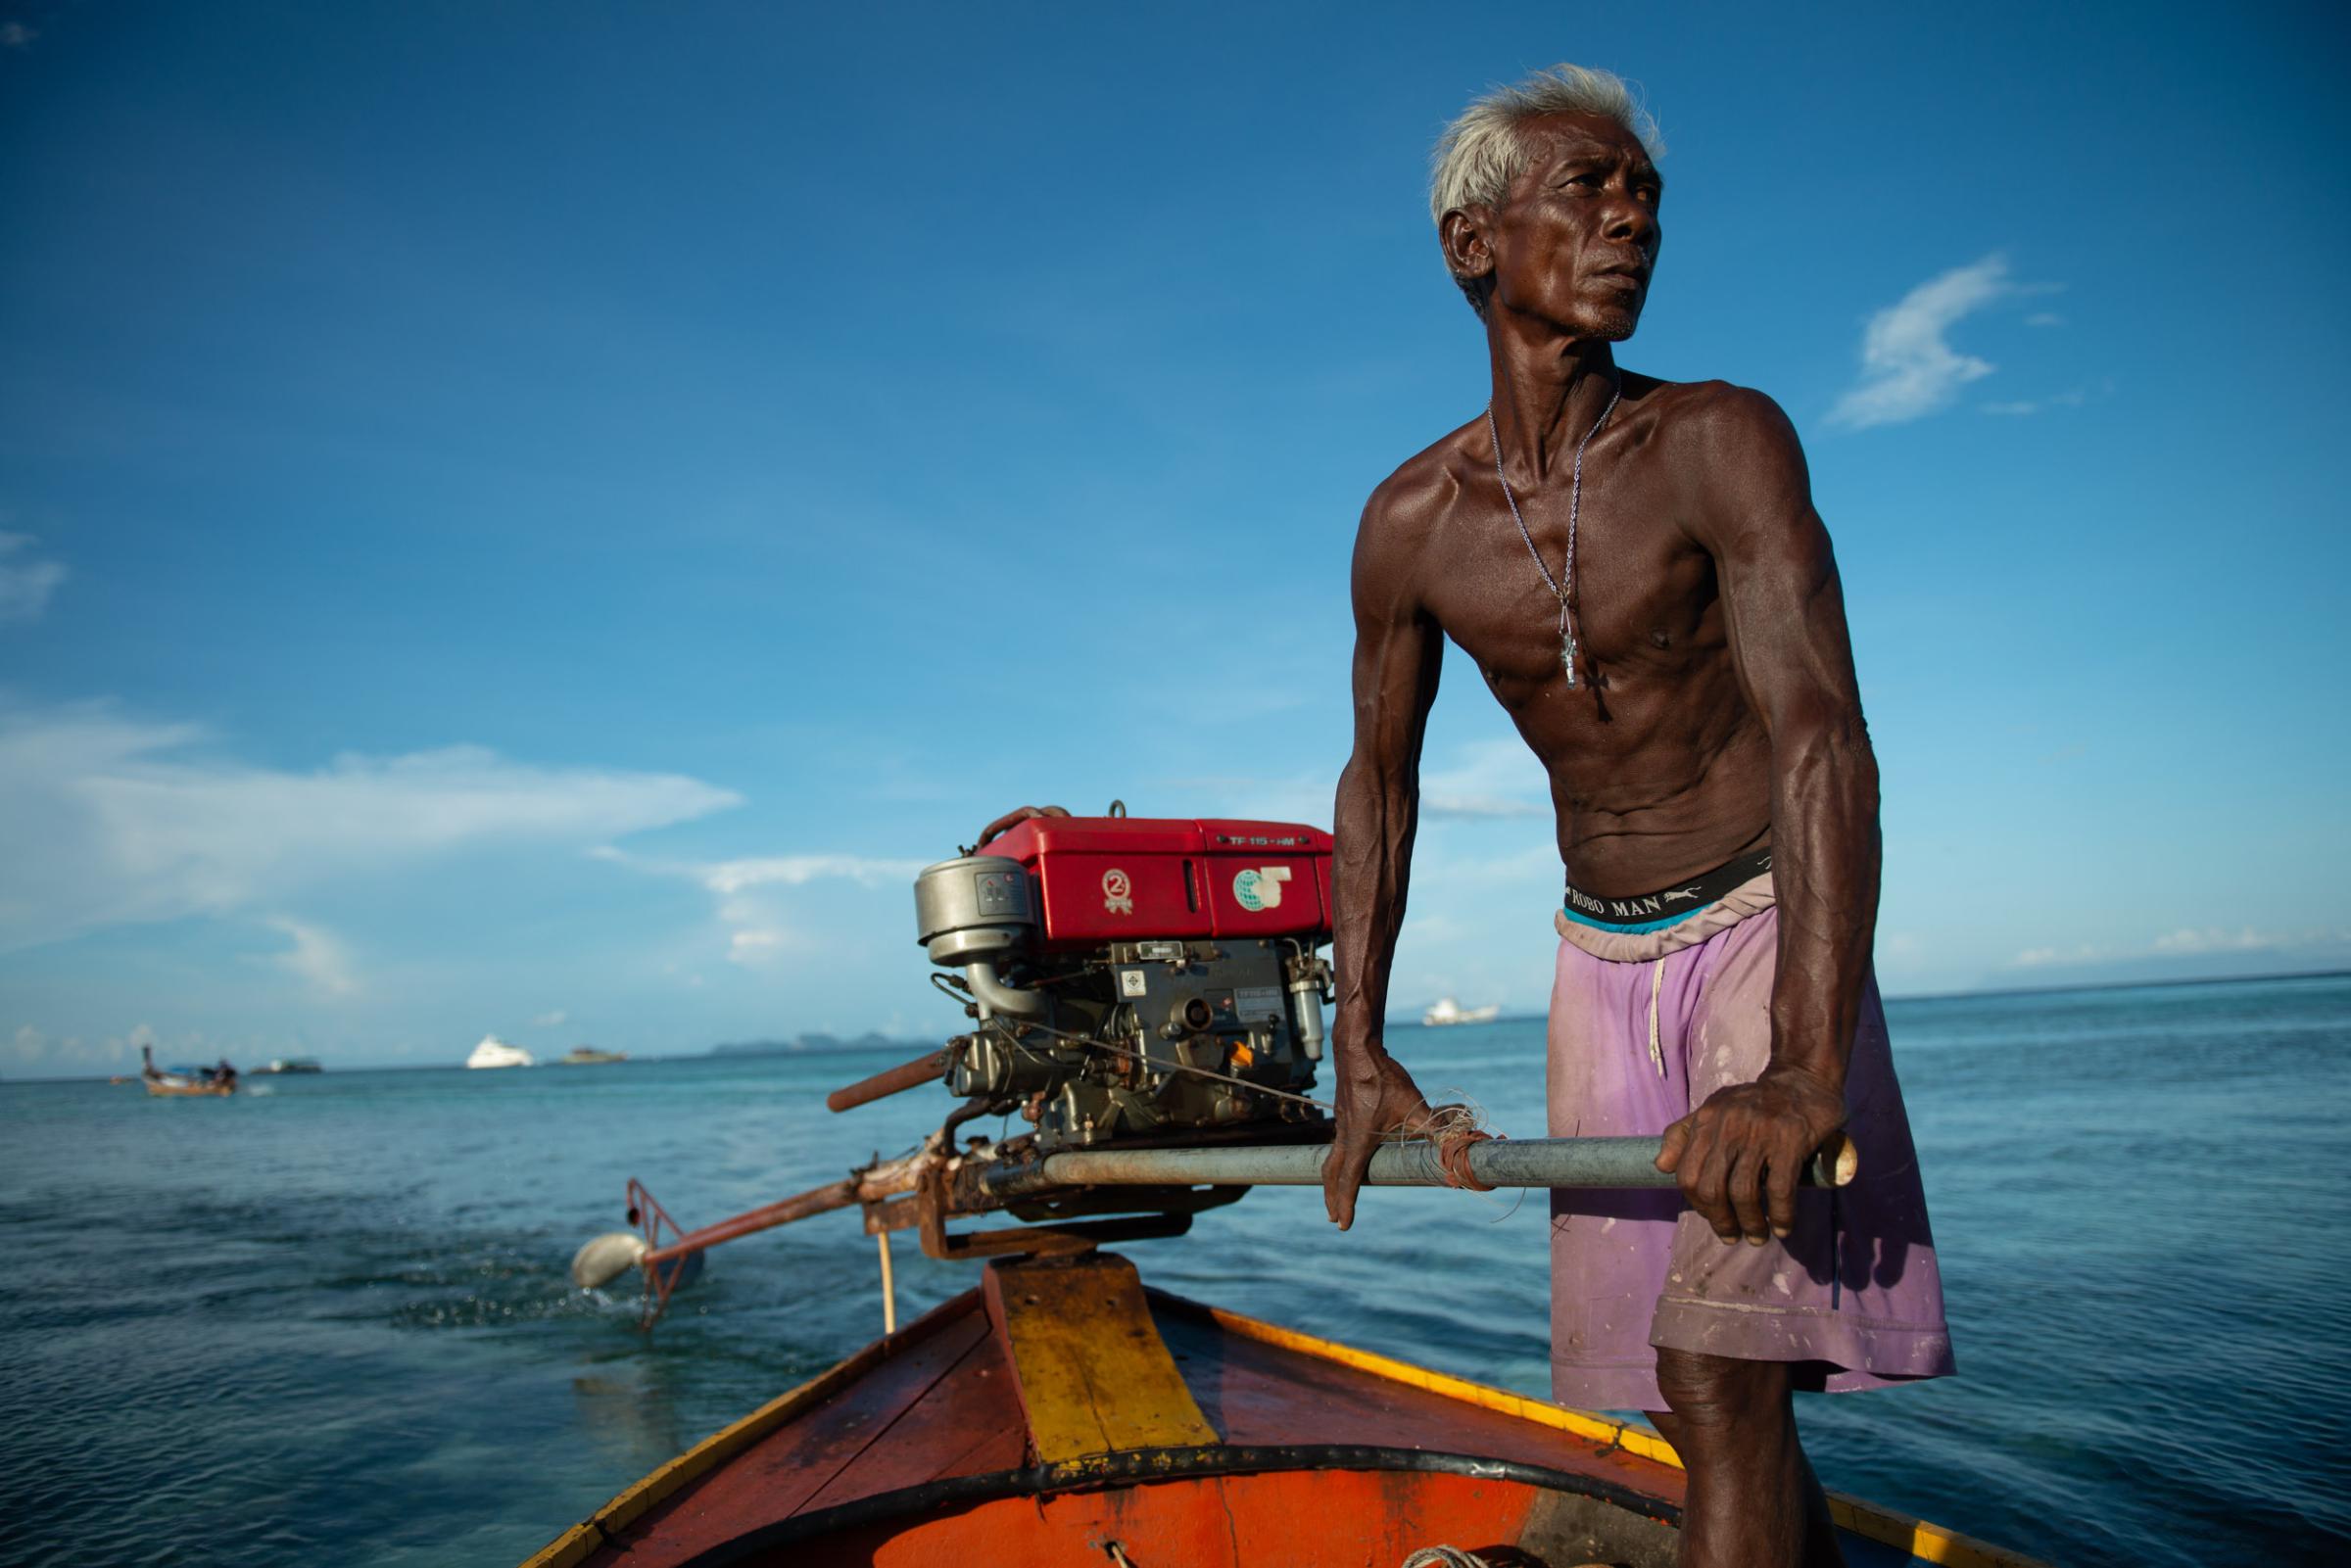 Lipe Island - A local sea gypsy makes his way home after accompanying...